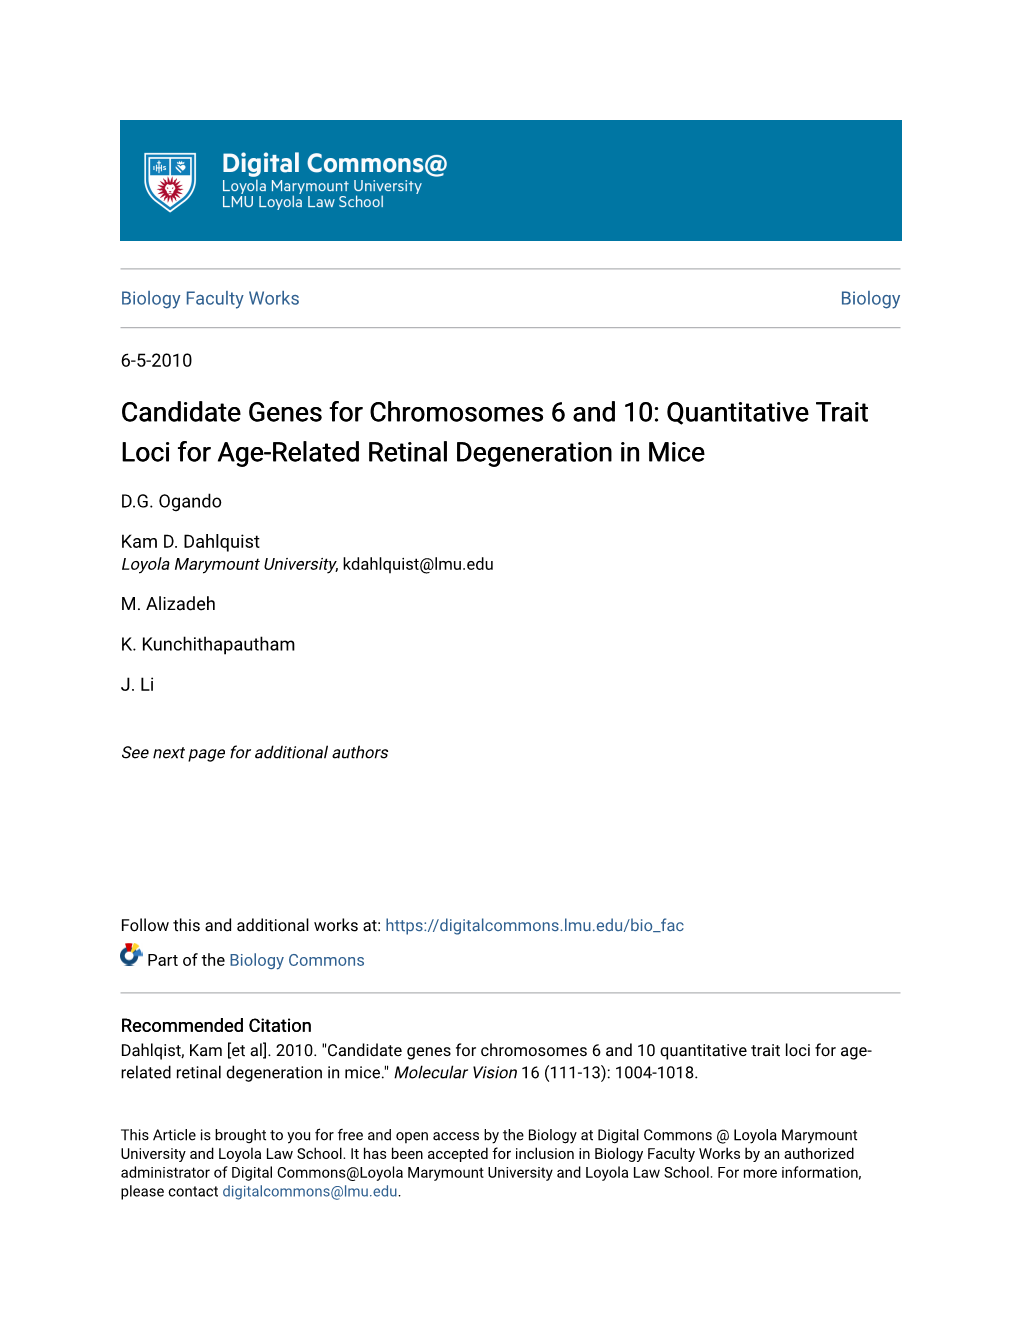 Candidate Genes for Chromosomes 6 and 10: Quantitative Trait Loci for Age-Related Retinal Degeneration in Mice